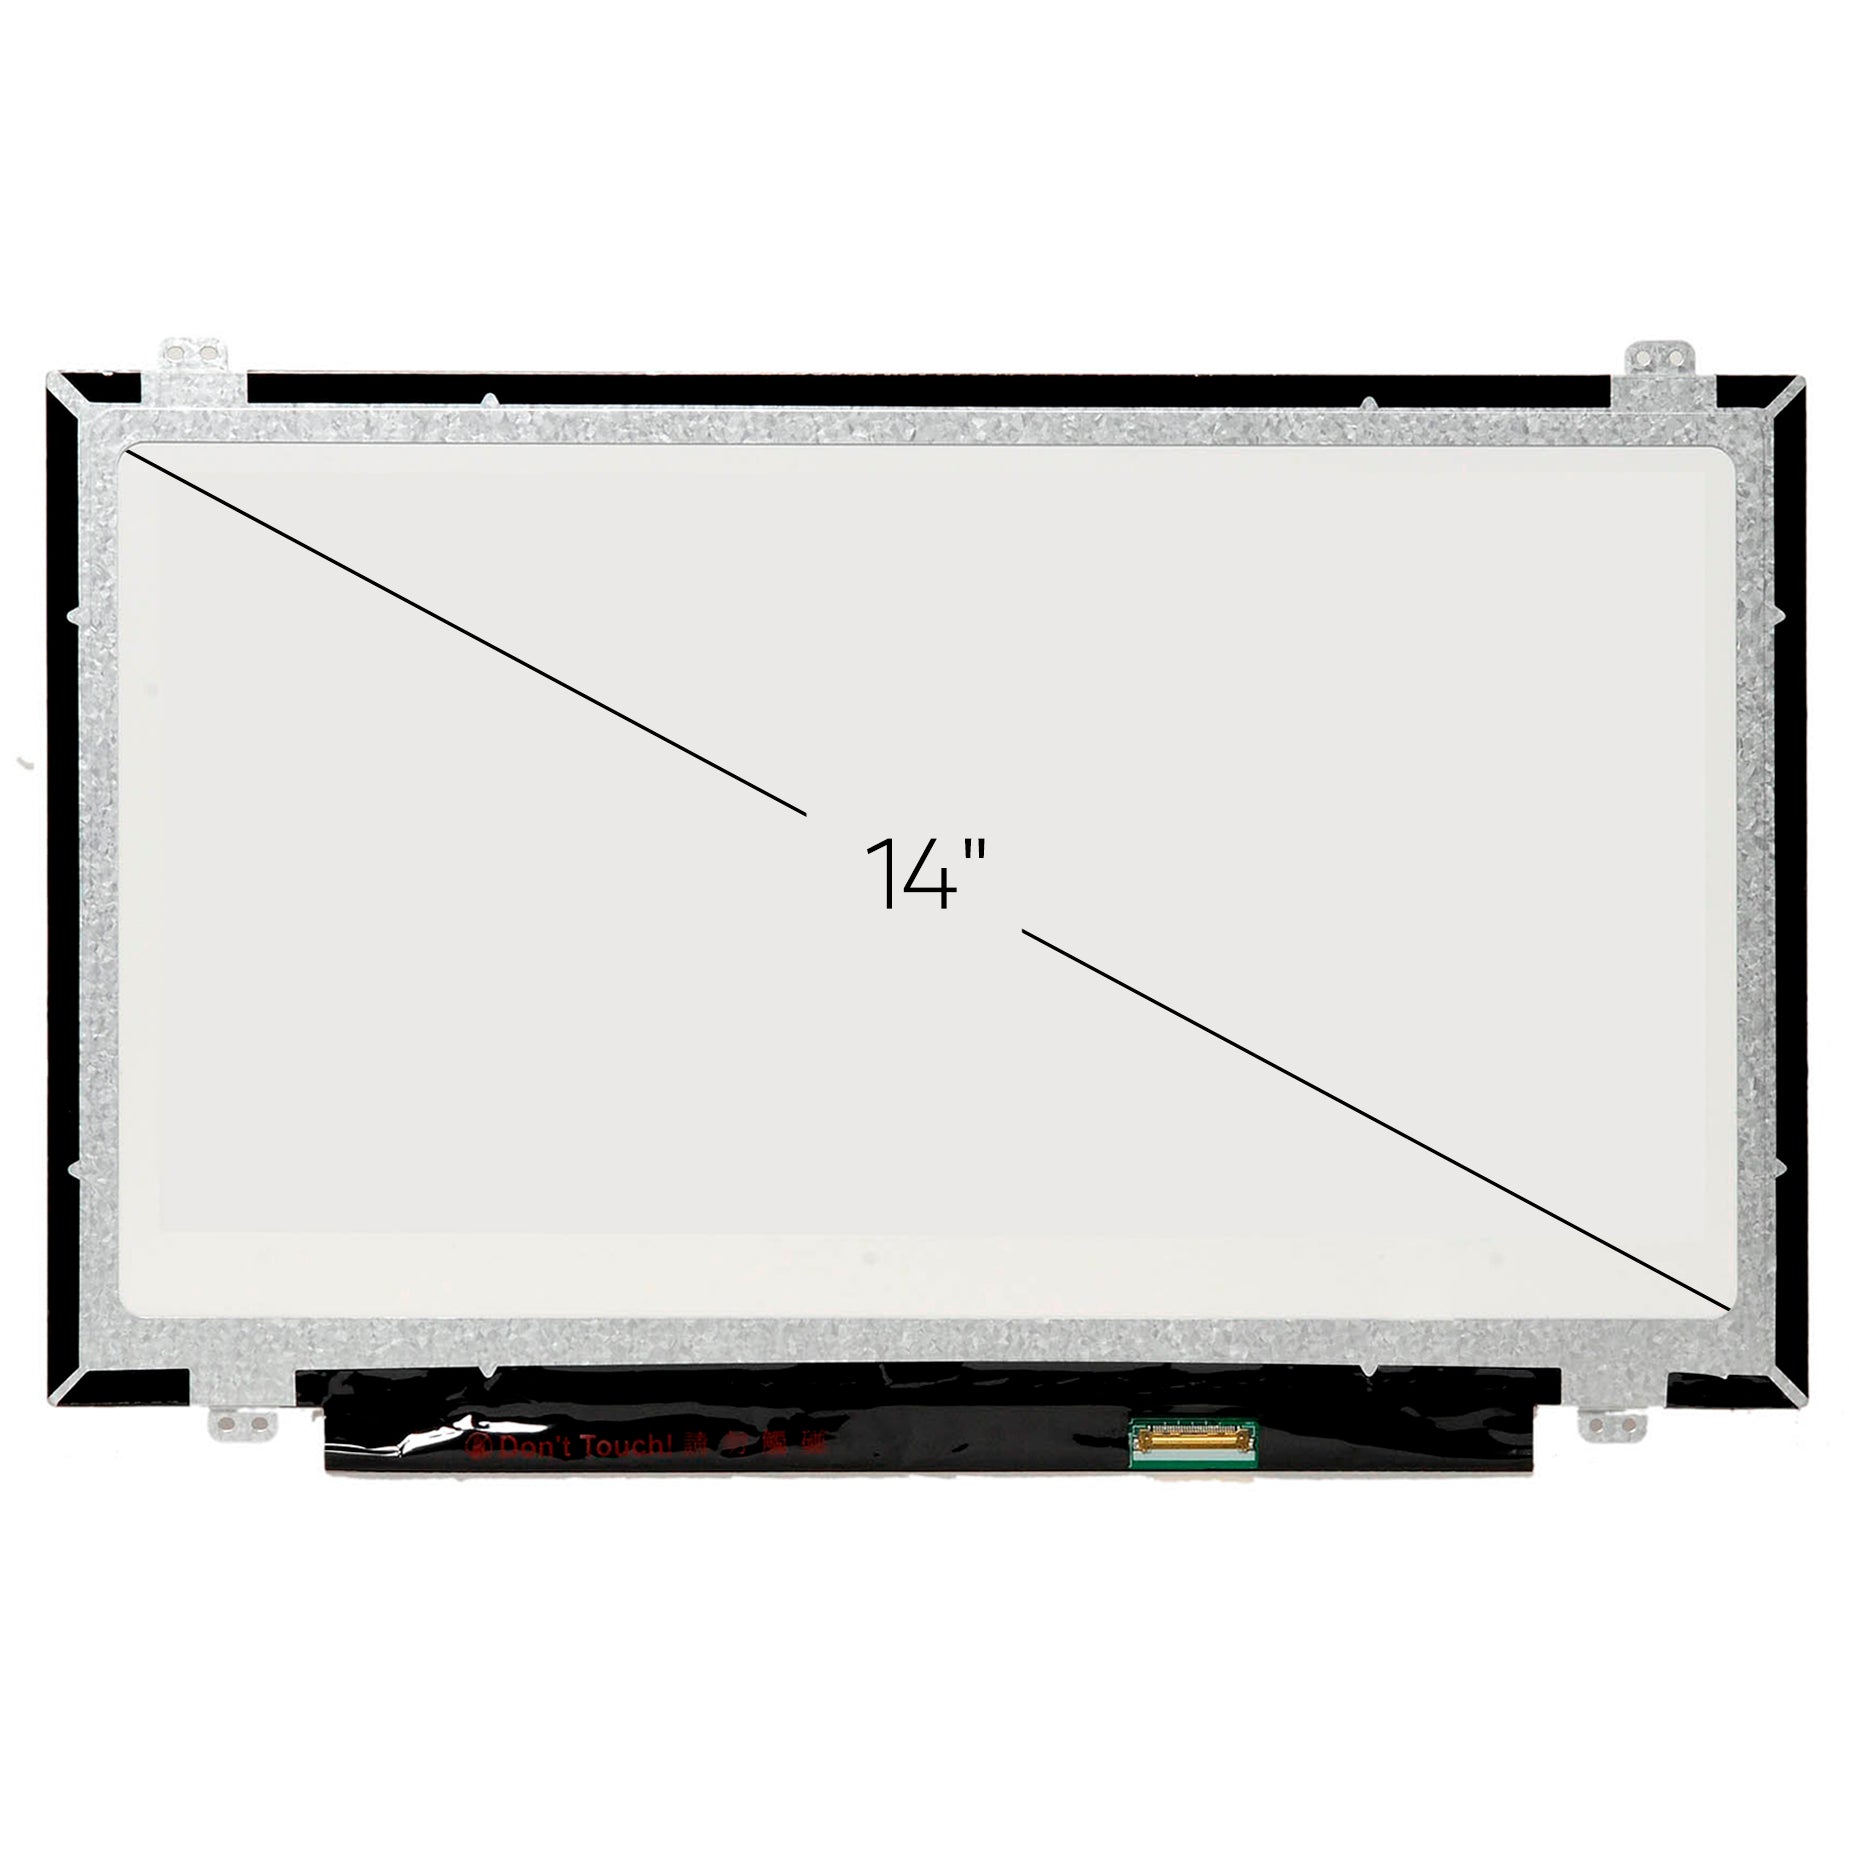 Screen Replacement for Lenovo FRU 01EN019 HD 1366x768 Glossy LCD LED Display